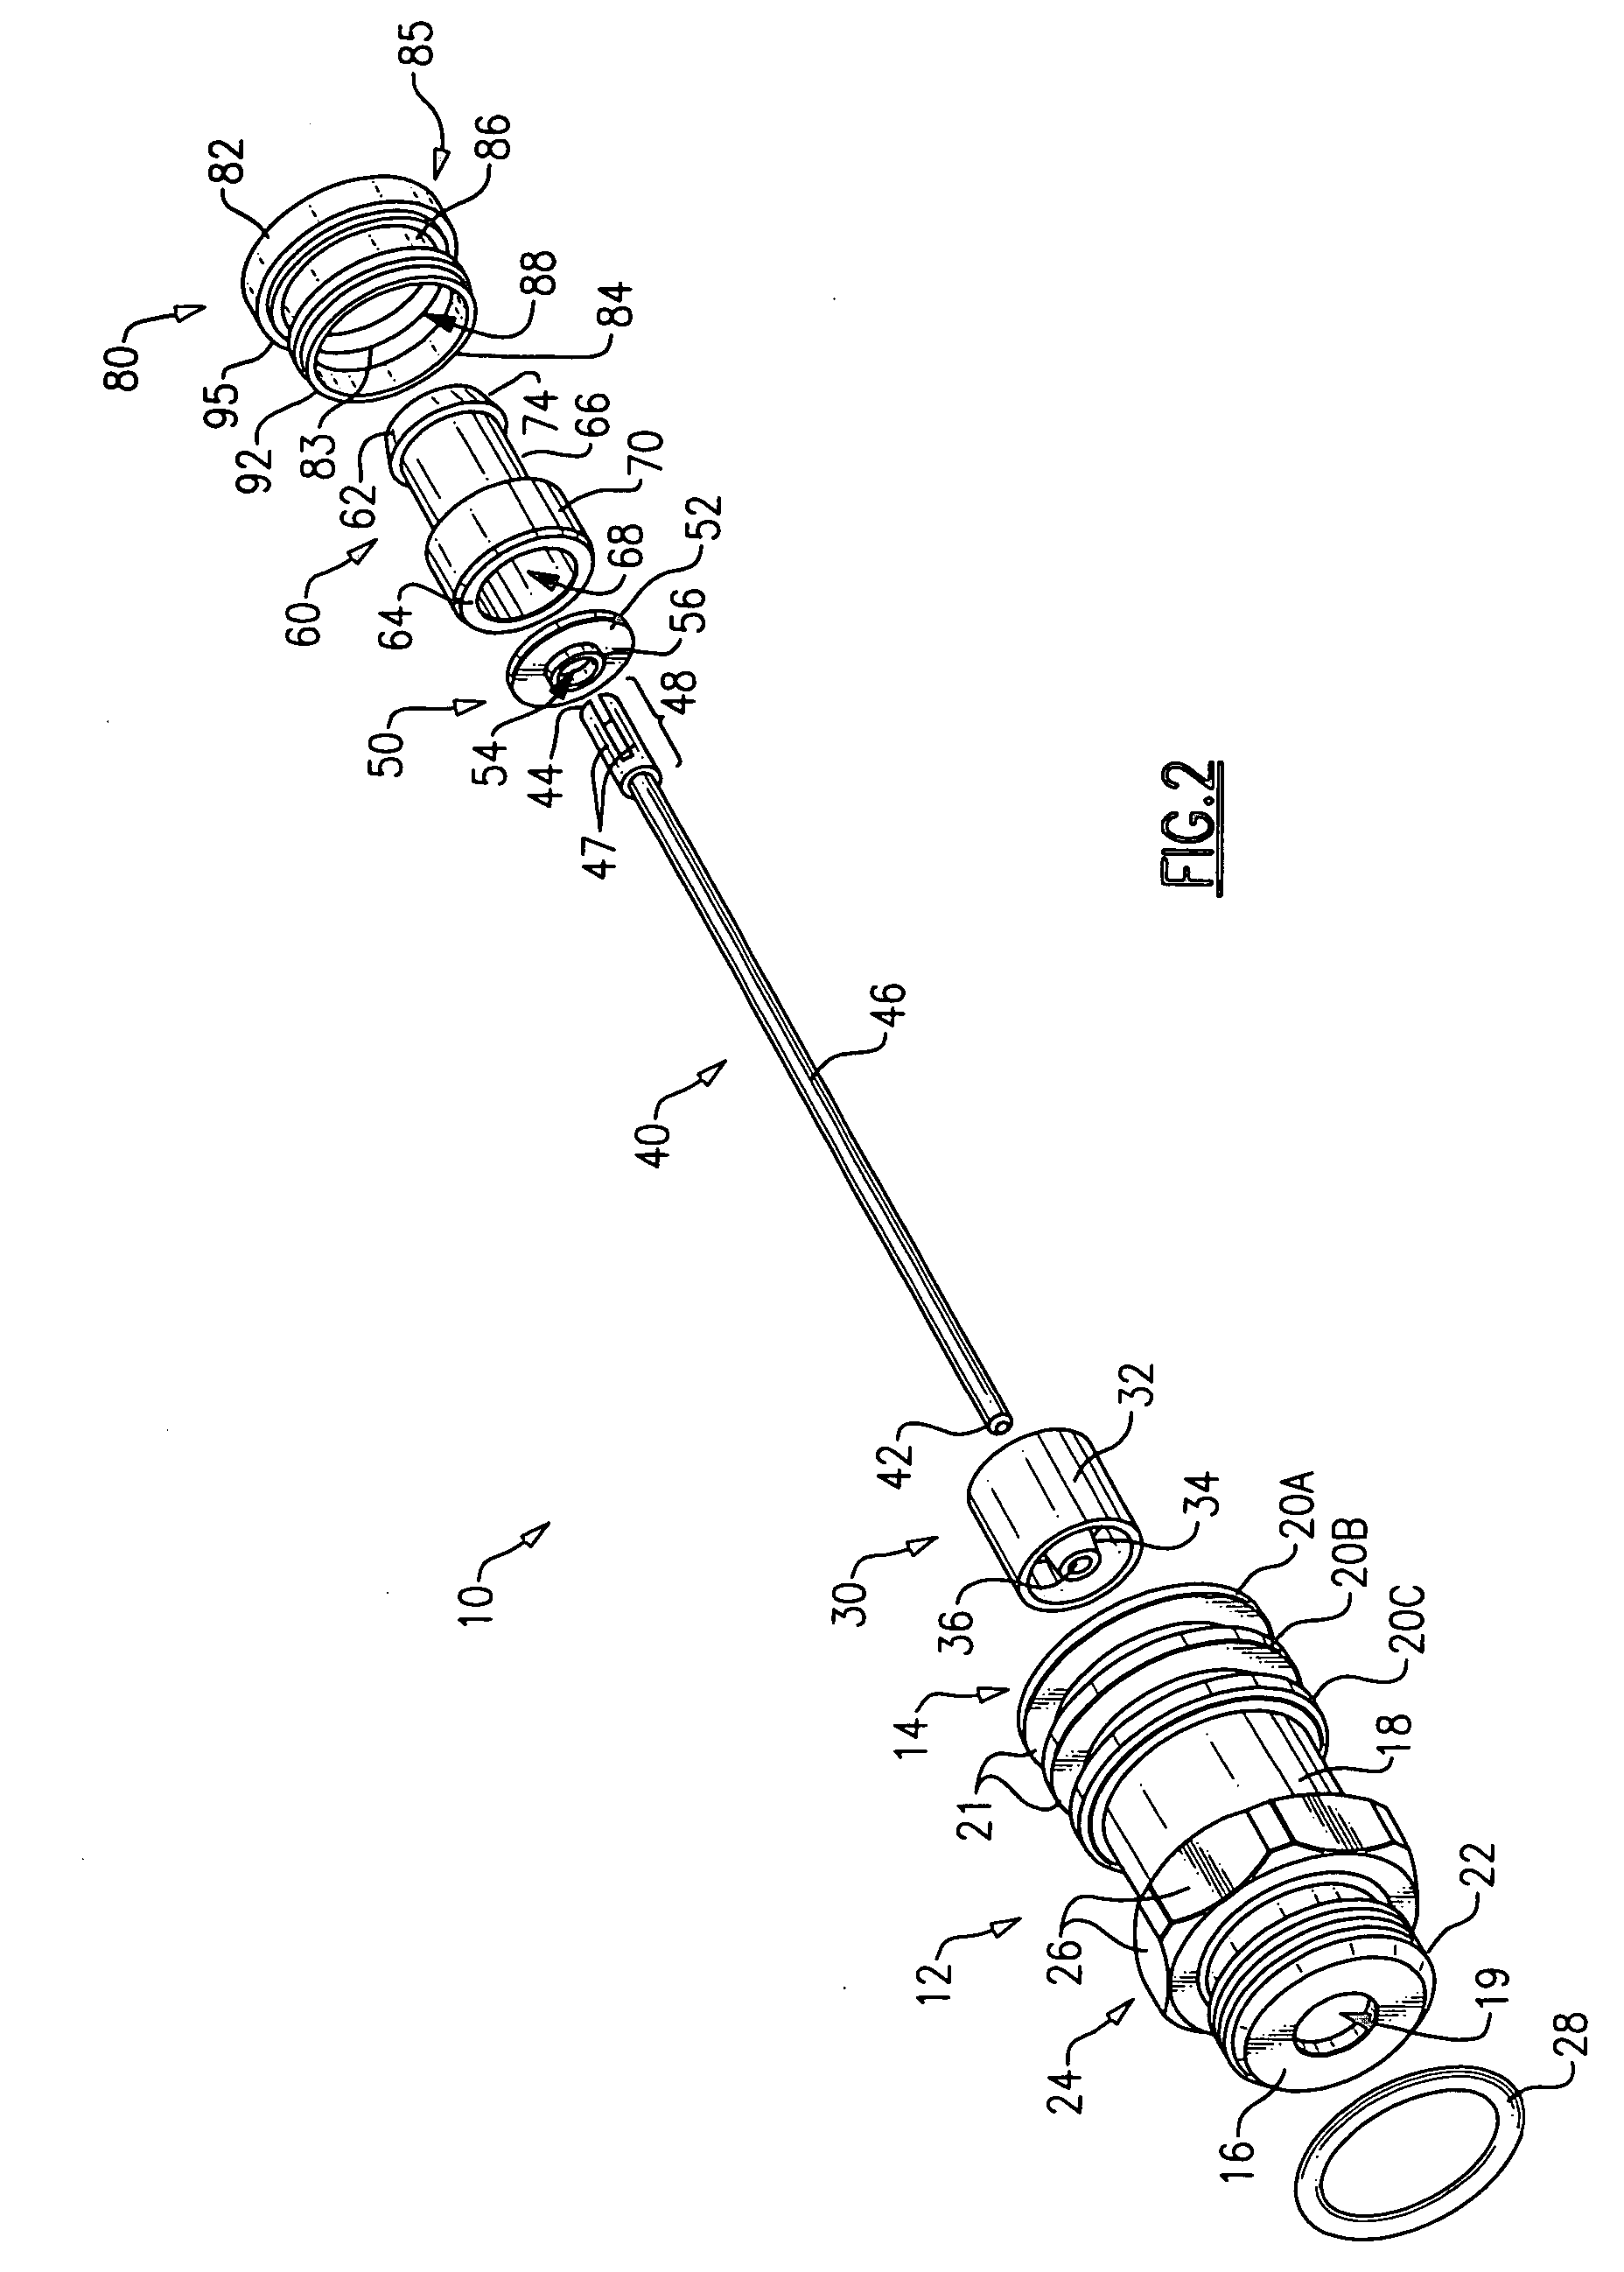 Compression connector for braided coaxial cable